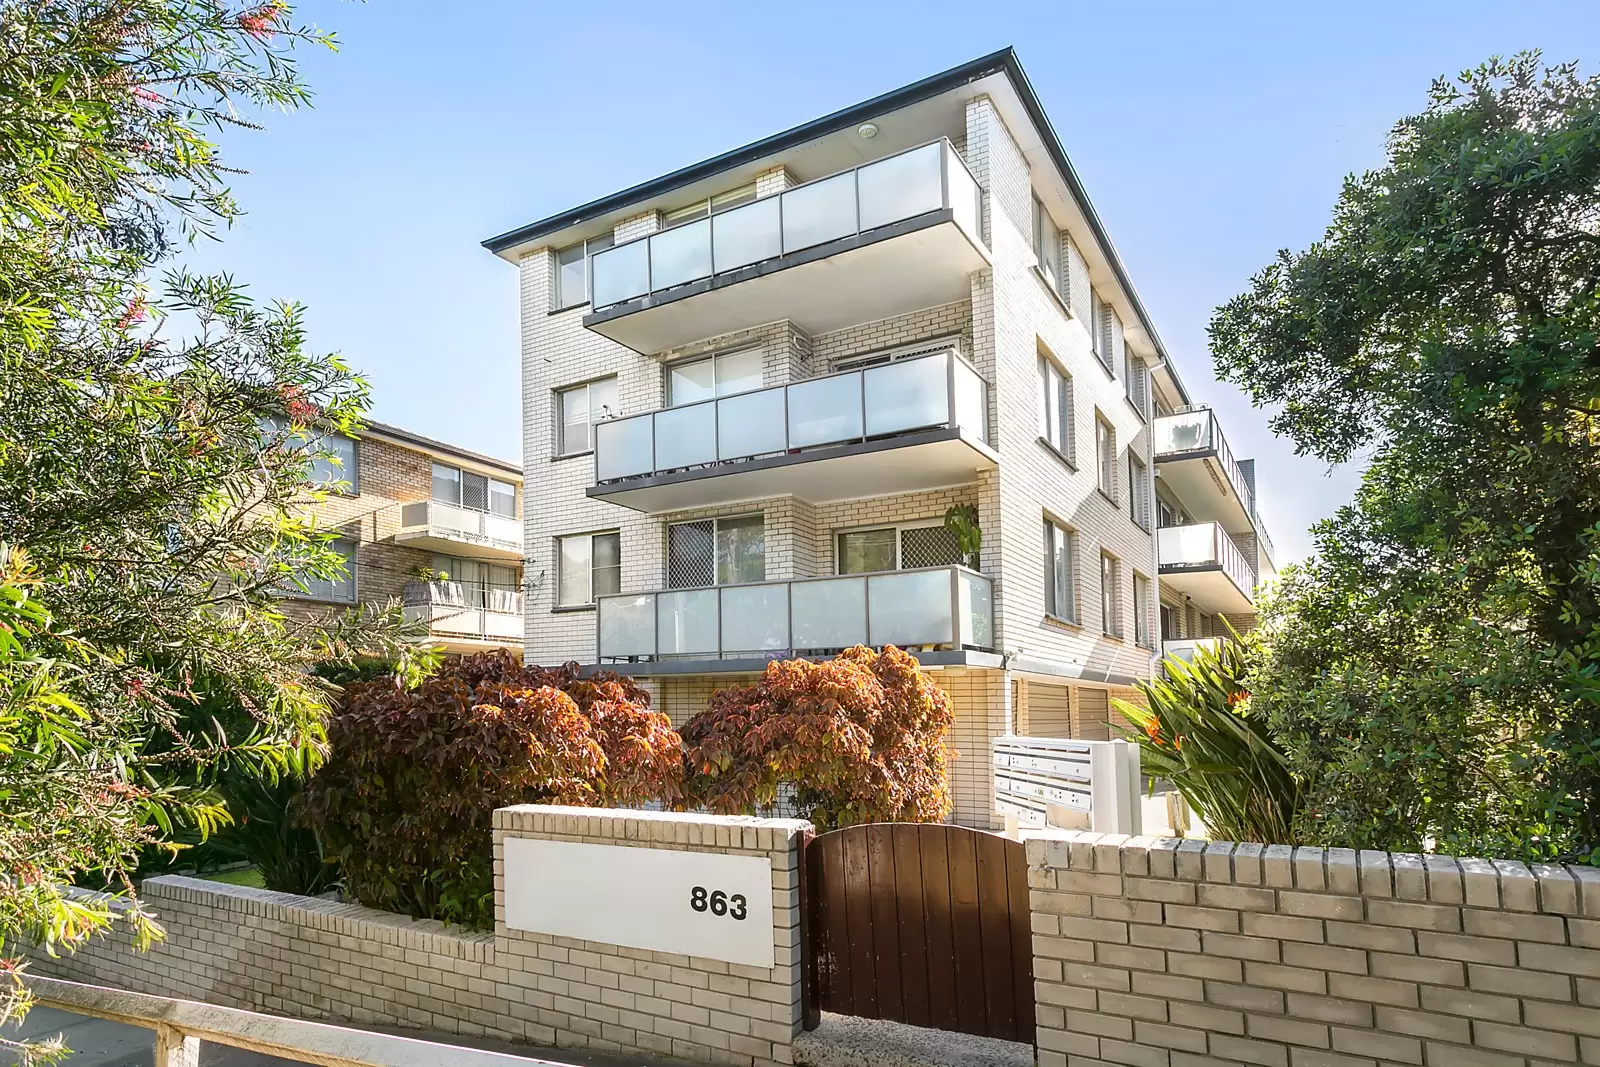 Photo #3: 3/863-865 Anzac Parade, Maroubra - Sold by Sydney Sotheby's International Realty